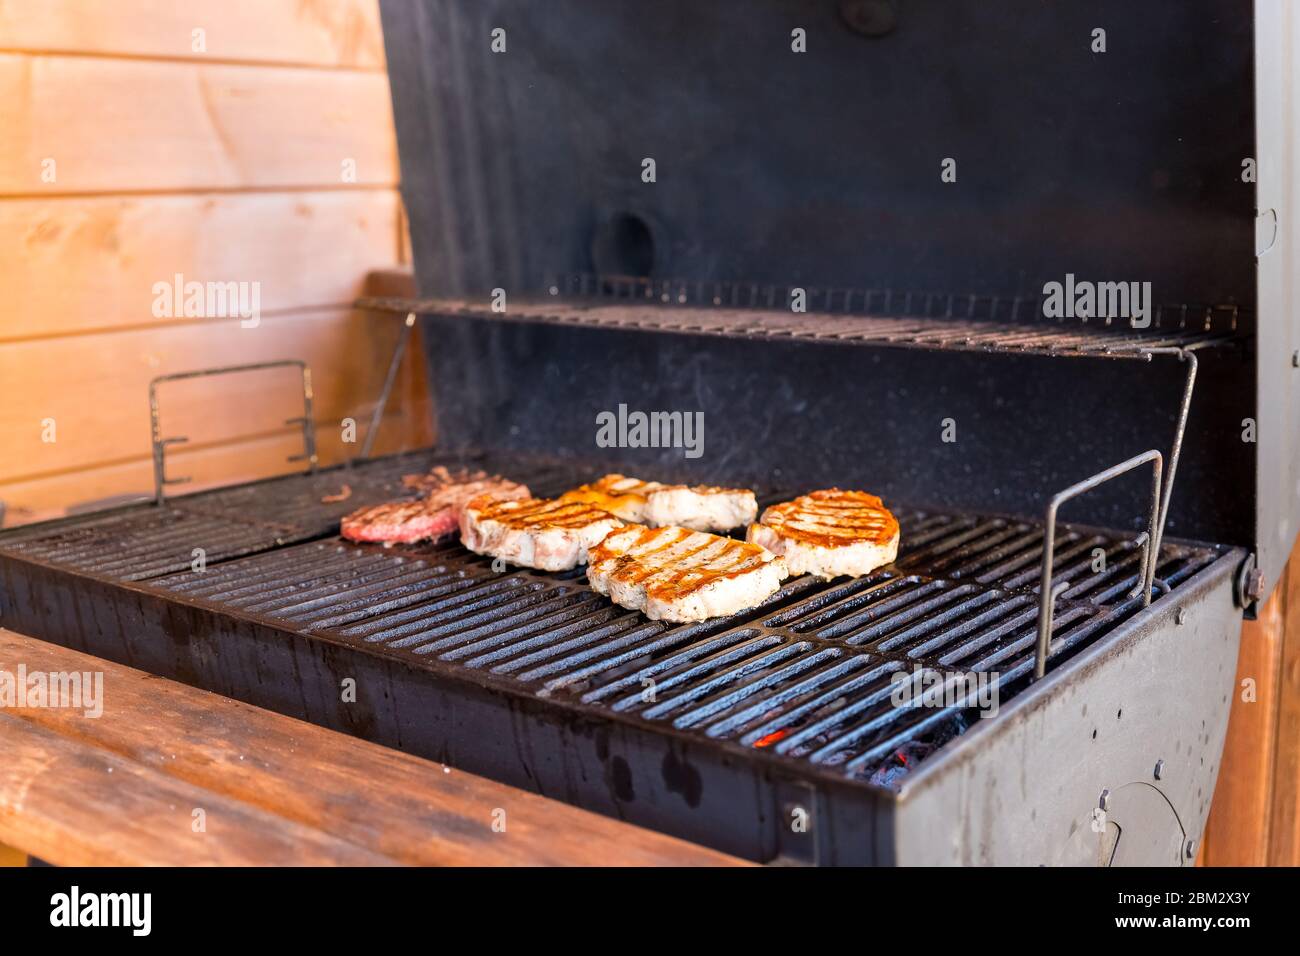 Entrecote Beef Steak On Grill With Rosemary Pepper And Salt - Barbecue.Grilled beef fillet steaks with and spices.Beef steak on the grill grate Stock Photo - Alamy